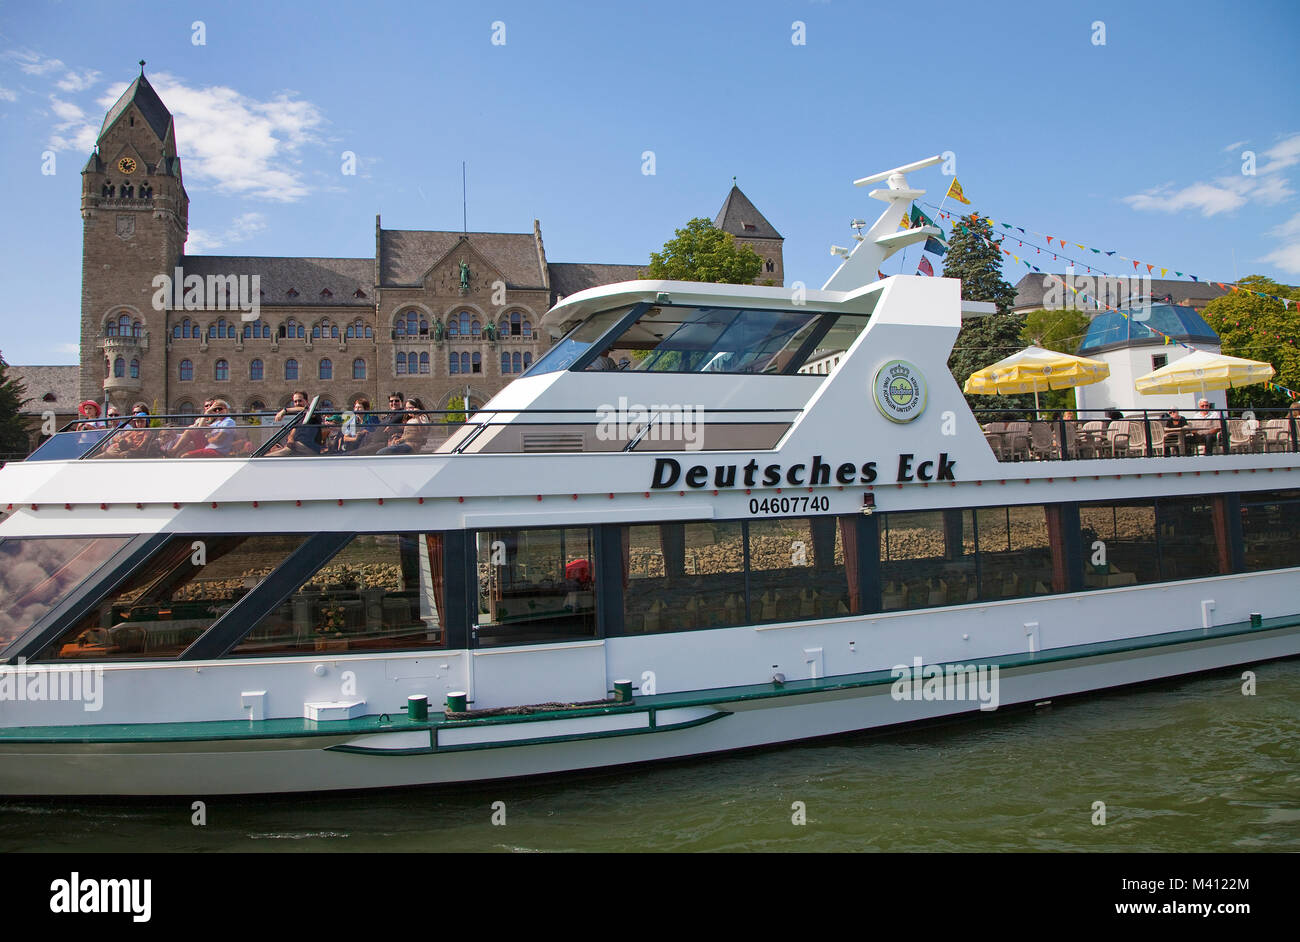 Excursion ship 'Deutsches Eck', behind the federal agency for defence technology, riverside of Coblenz, Rhineland-Palatinate, Germany, Europe Stock Photo